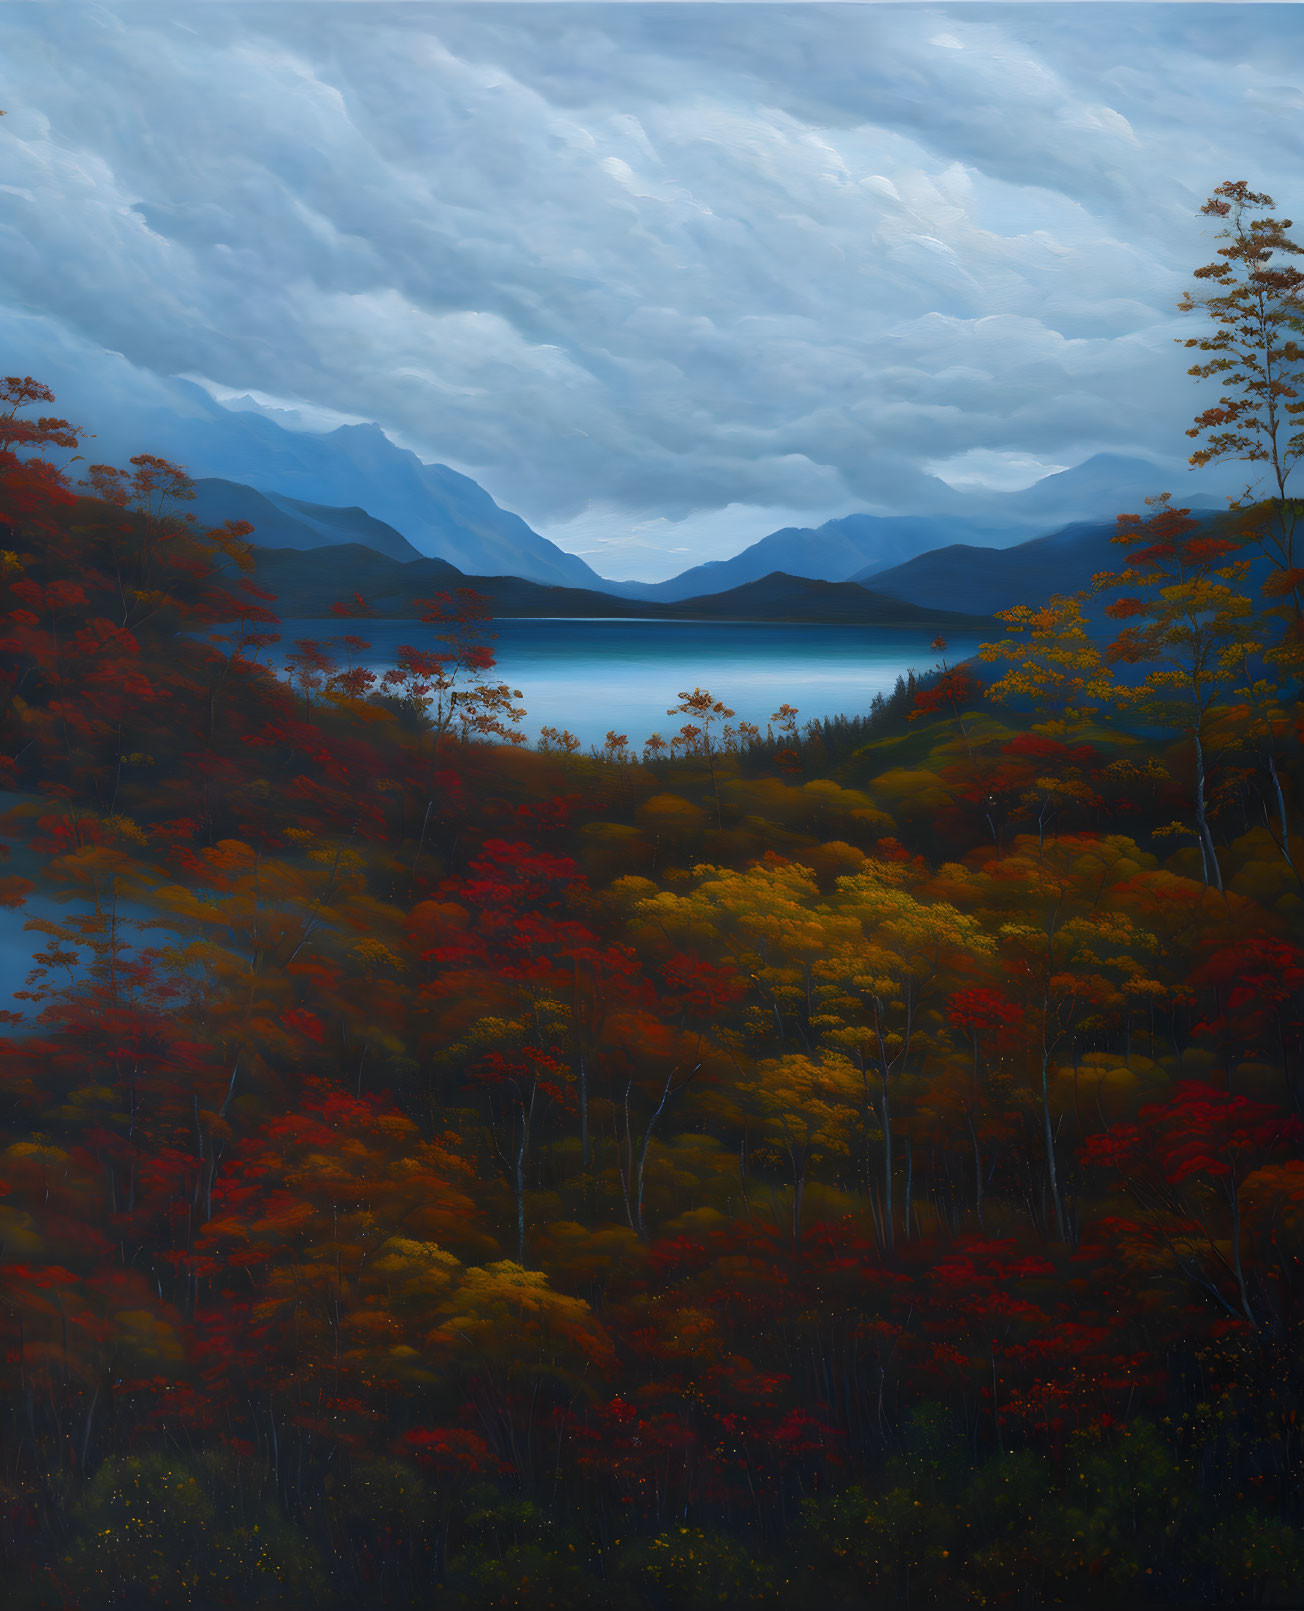 Scenic autumn landscape with fiery trees, tranquil lake, and distant mountains